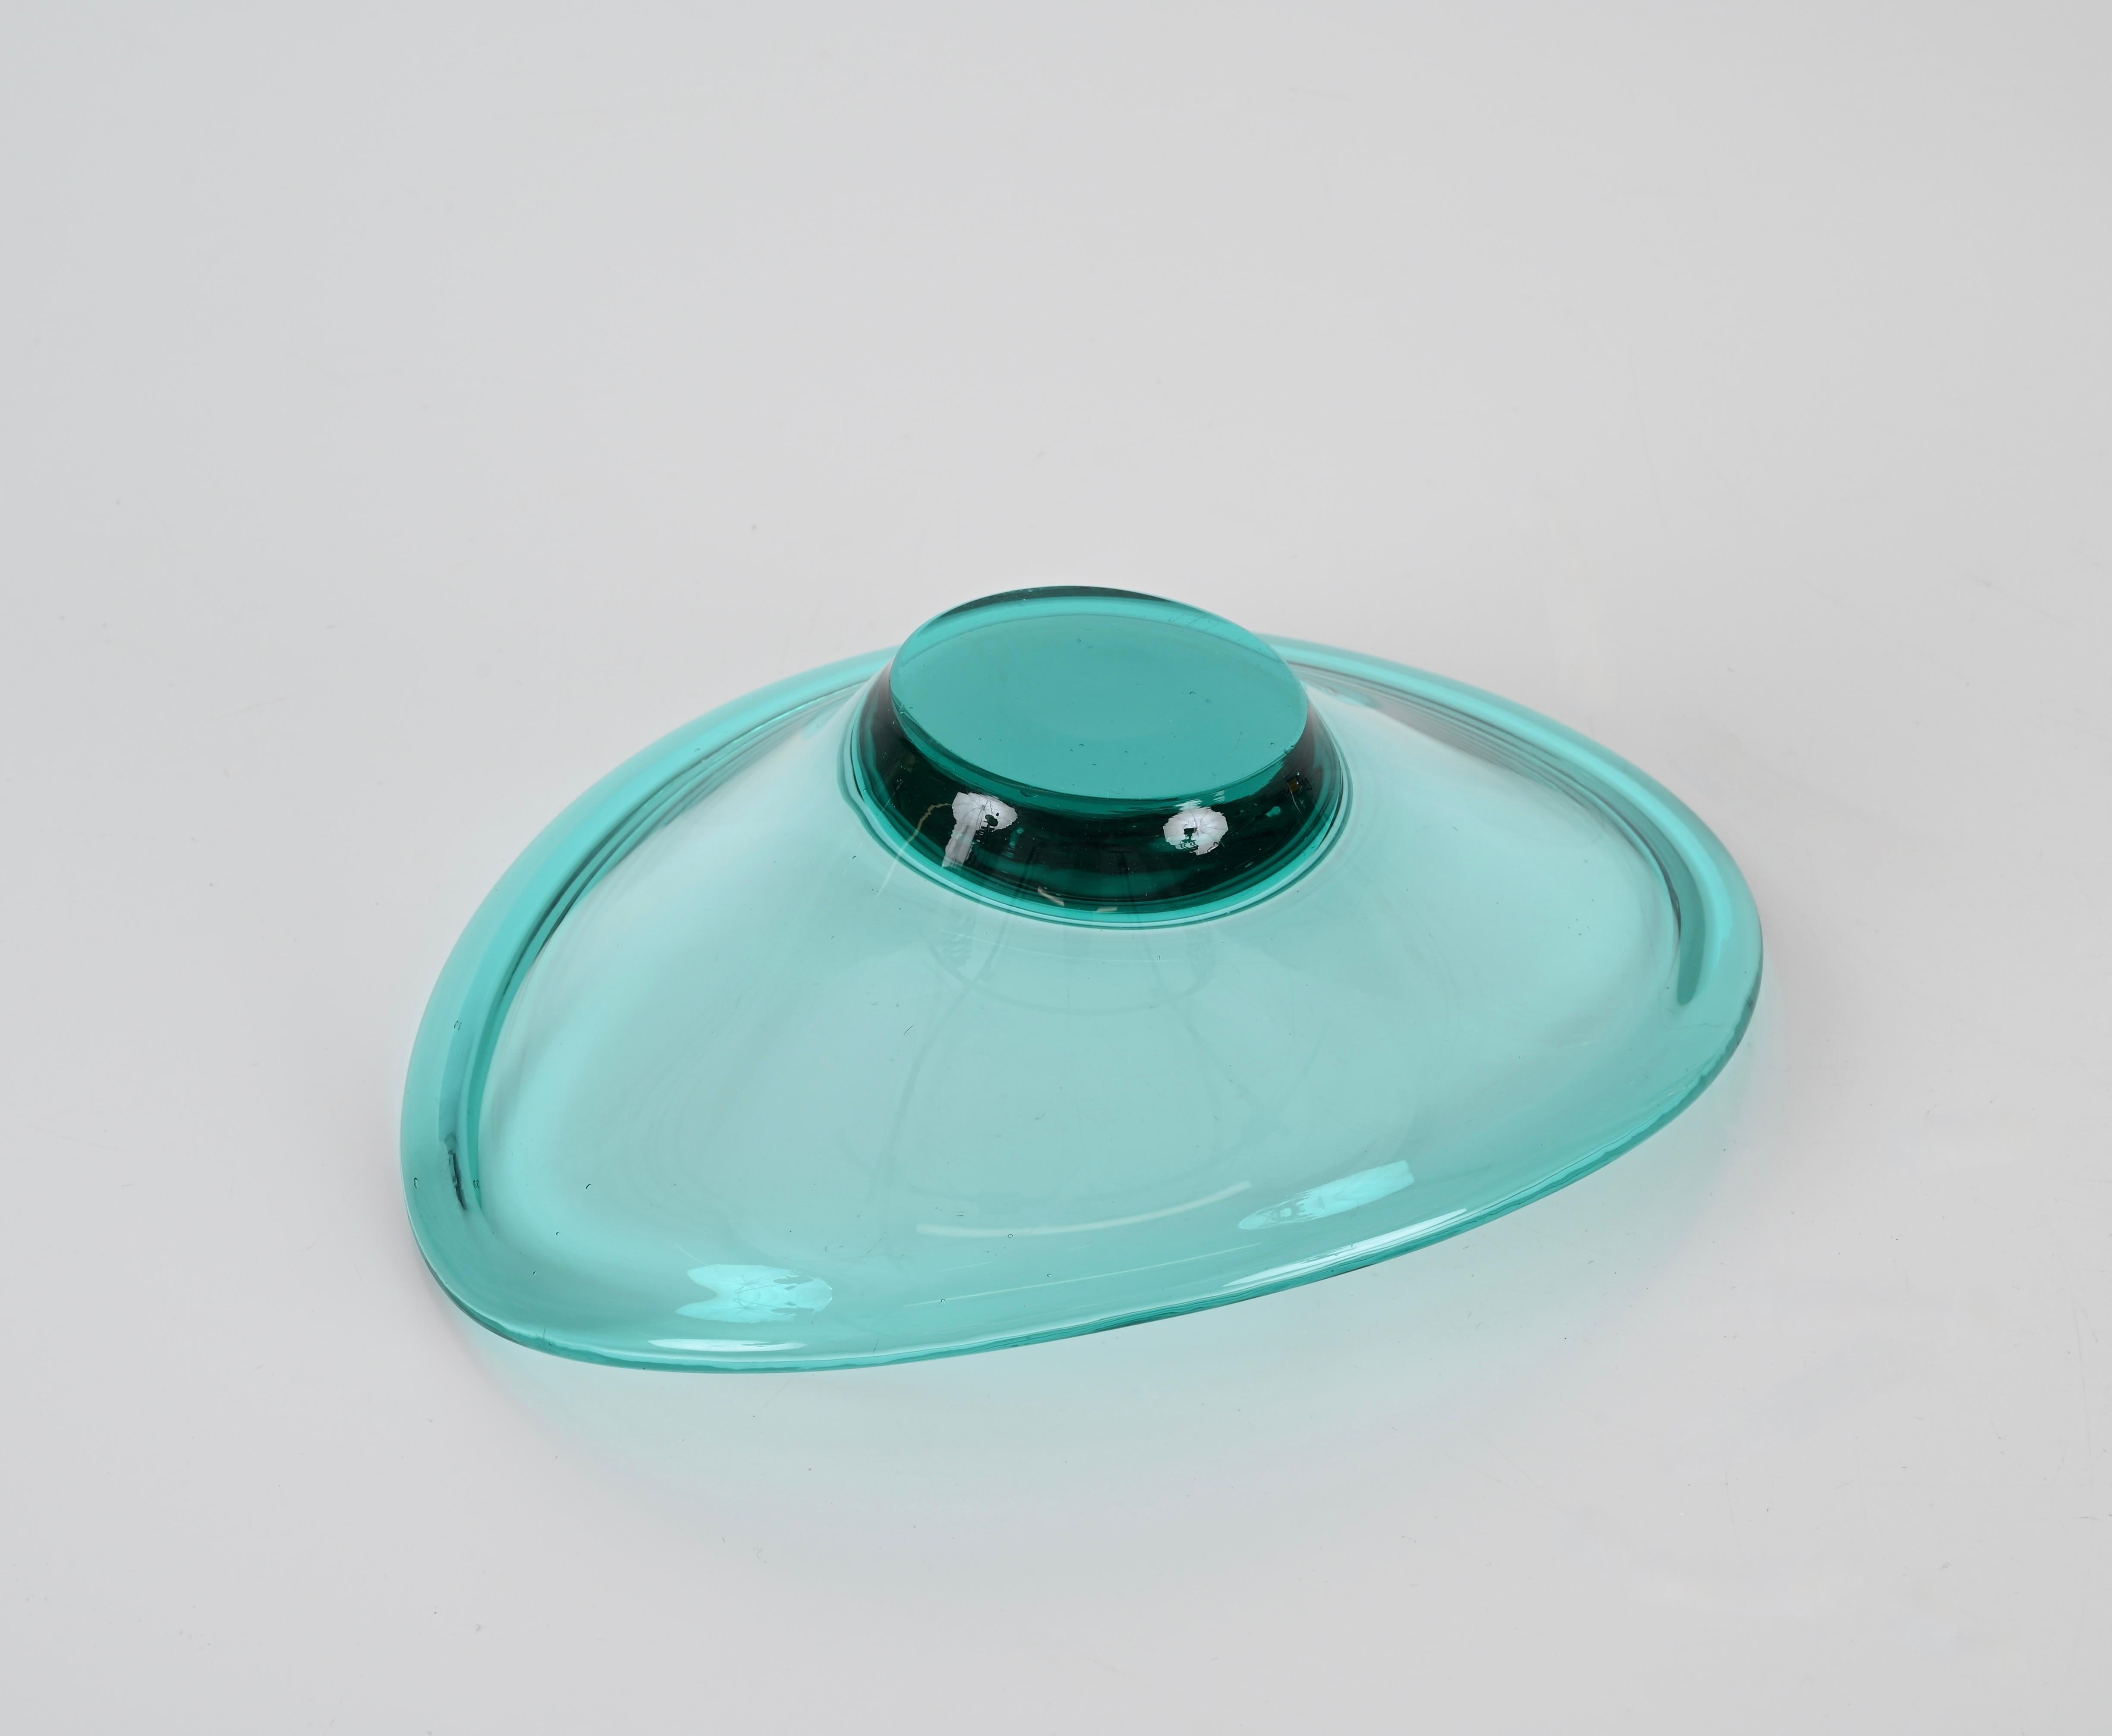 Tiffany Blue Murano Glass Bowl or Pocket Emptier, Italy, 1960s For Sale 1